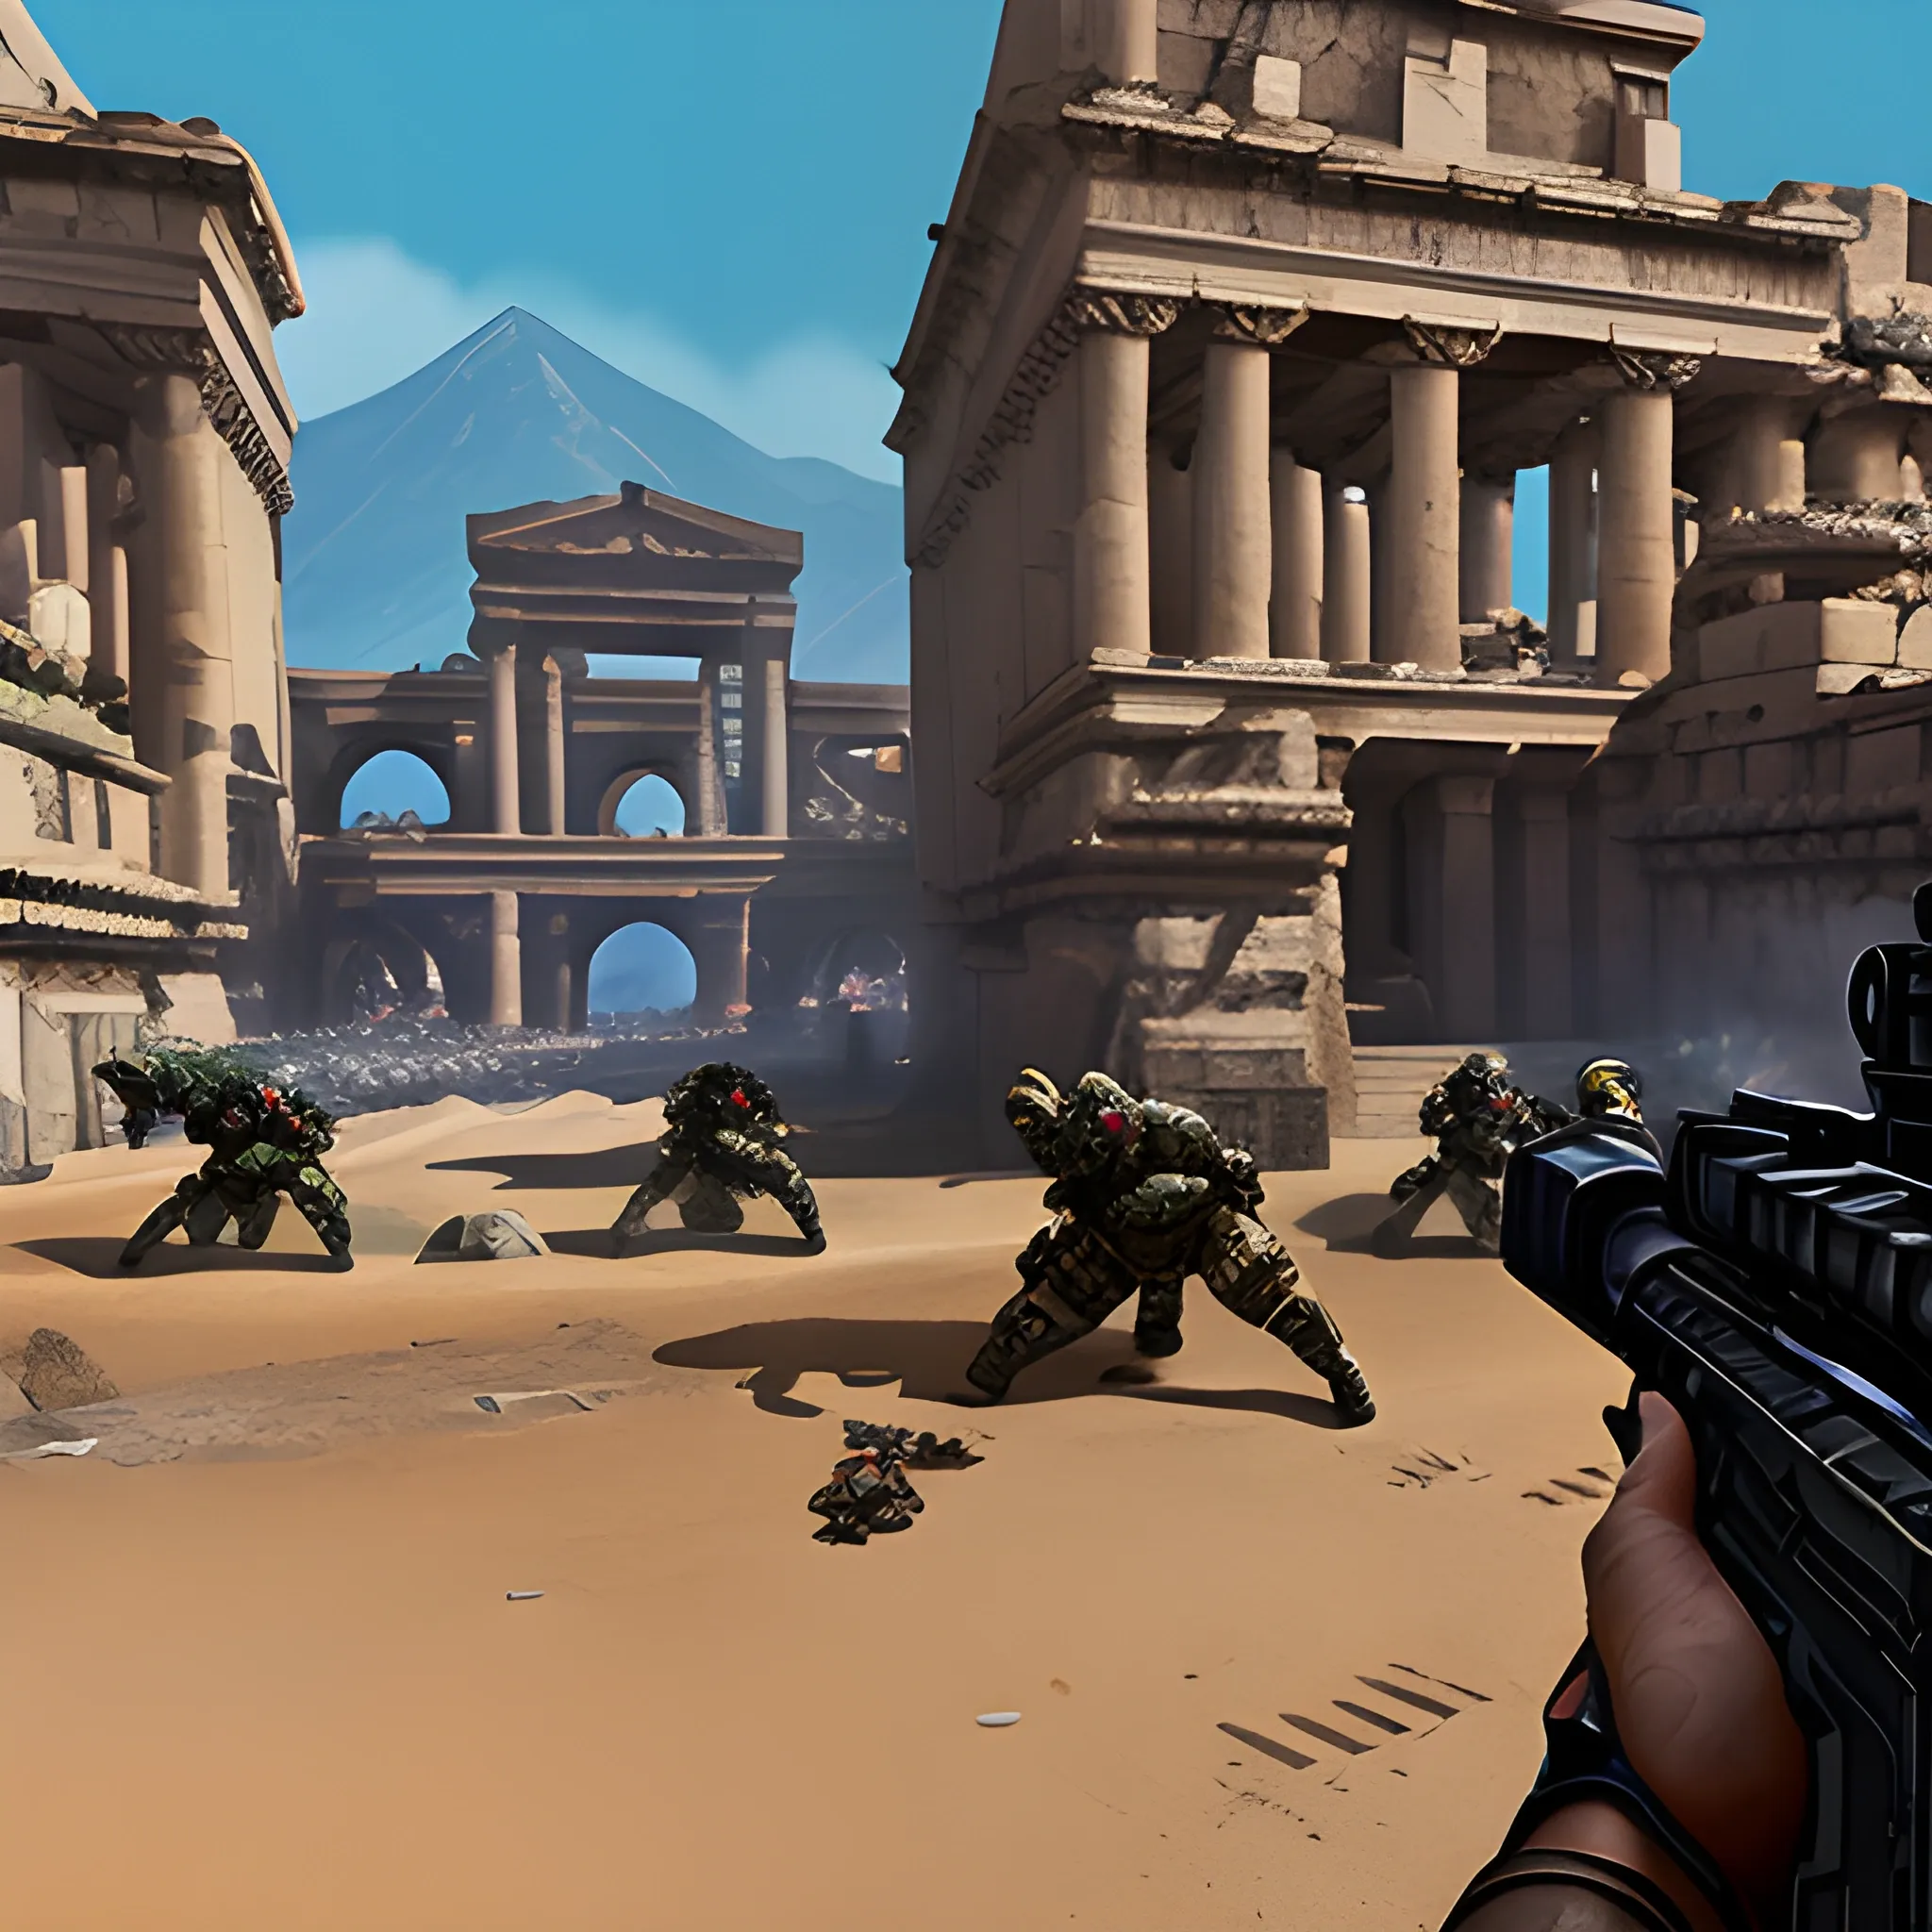 videogame screenshot with huge spangly sparkly triple-barrelled assault rifle with gunsight in foreground, with young mothers pushing perambulators, in a municipal park, in the ancient world, very detailed